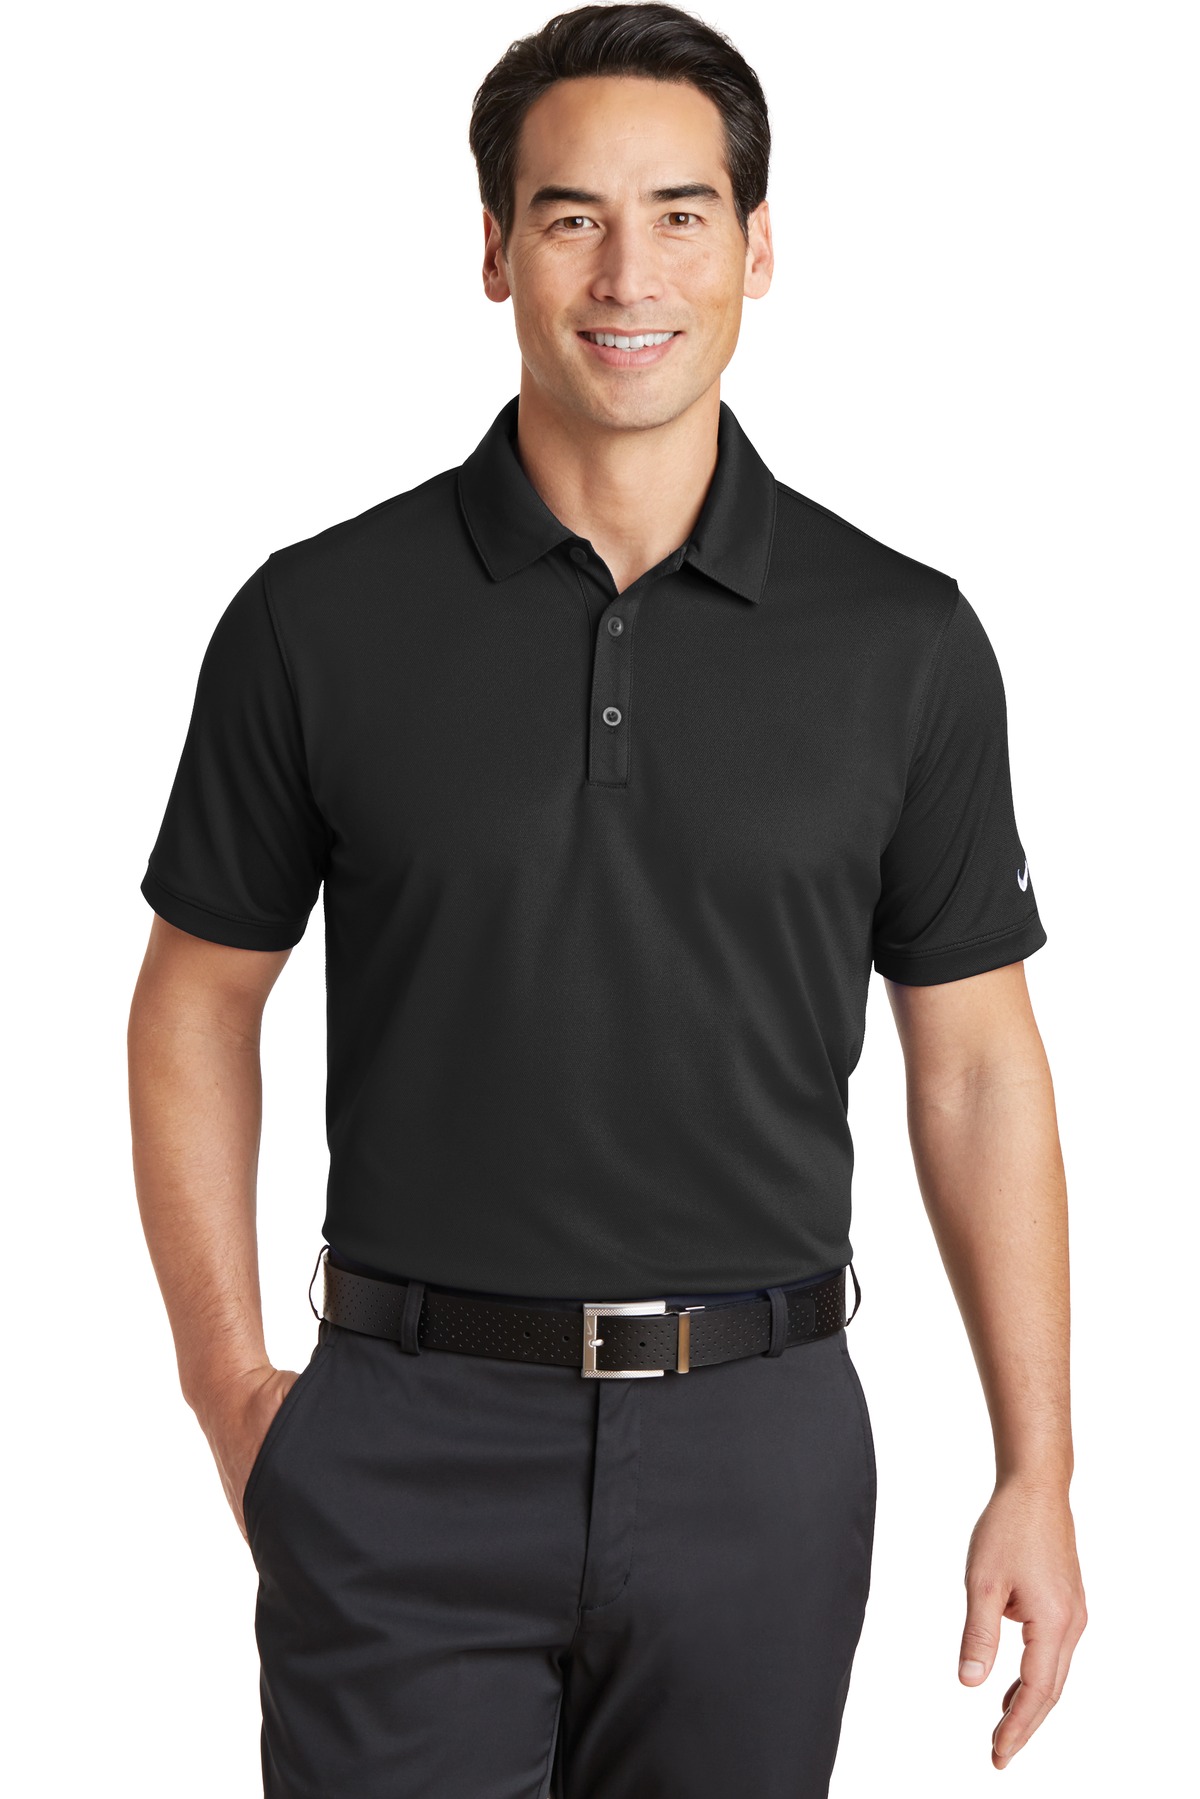 Buy Nike Dri-FIT Solid Icon Pique Modern Fit Polo. - Online at Best ...